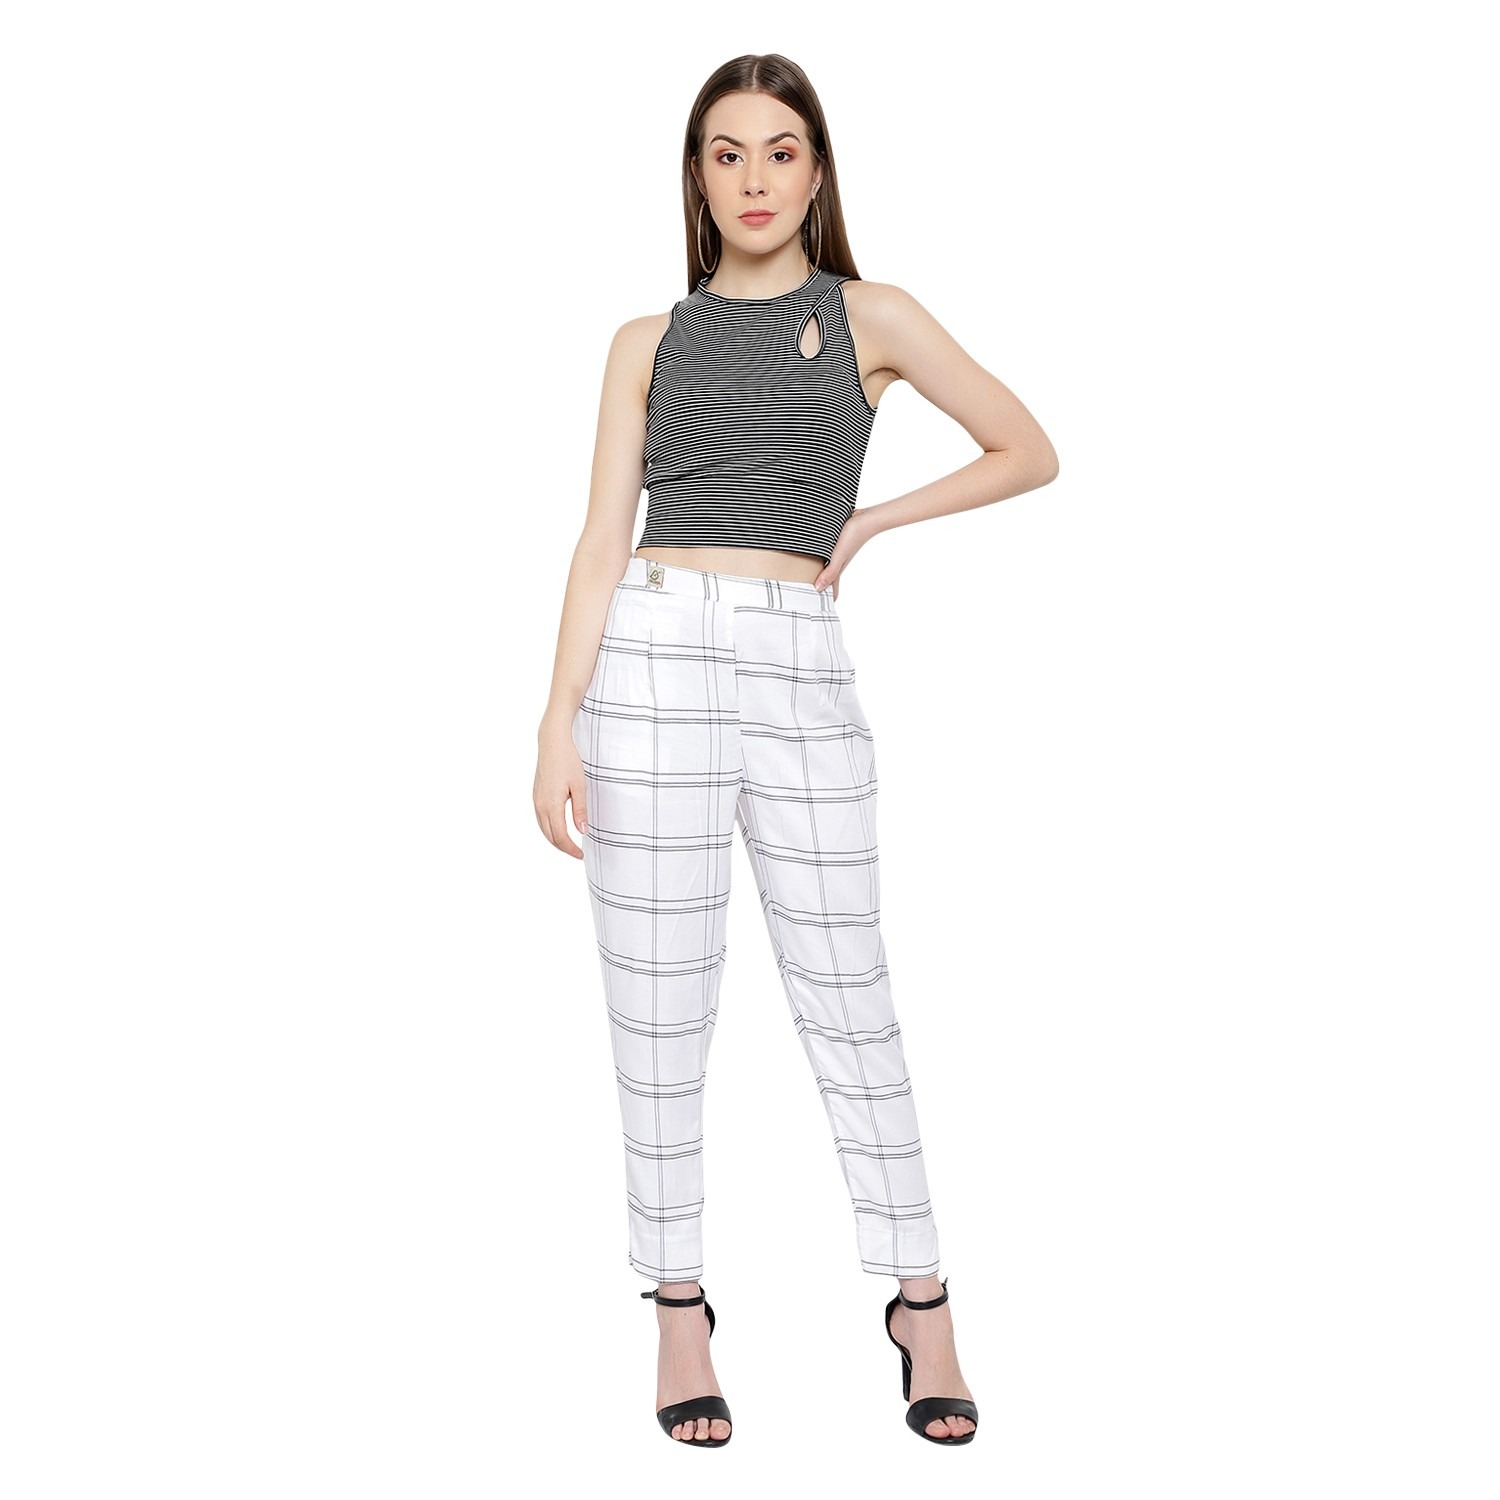 Gladys Checkered women's trousers: for sale at 19.99€ on Mecshopping.it